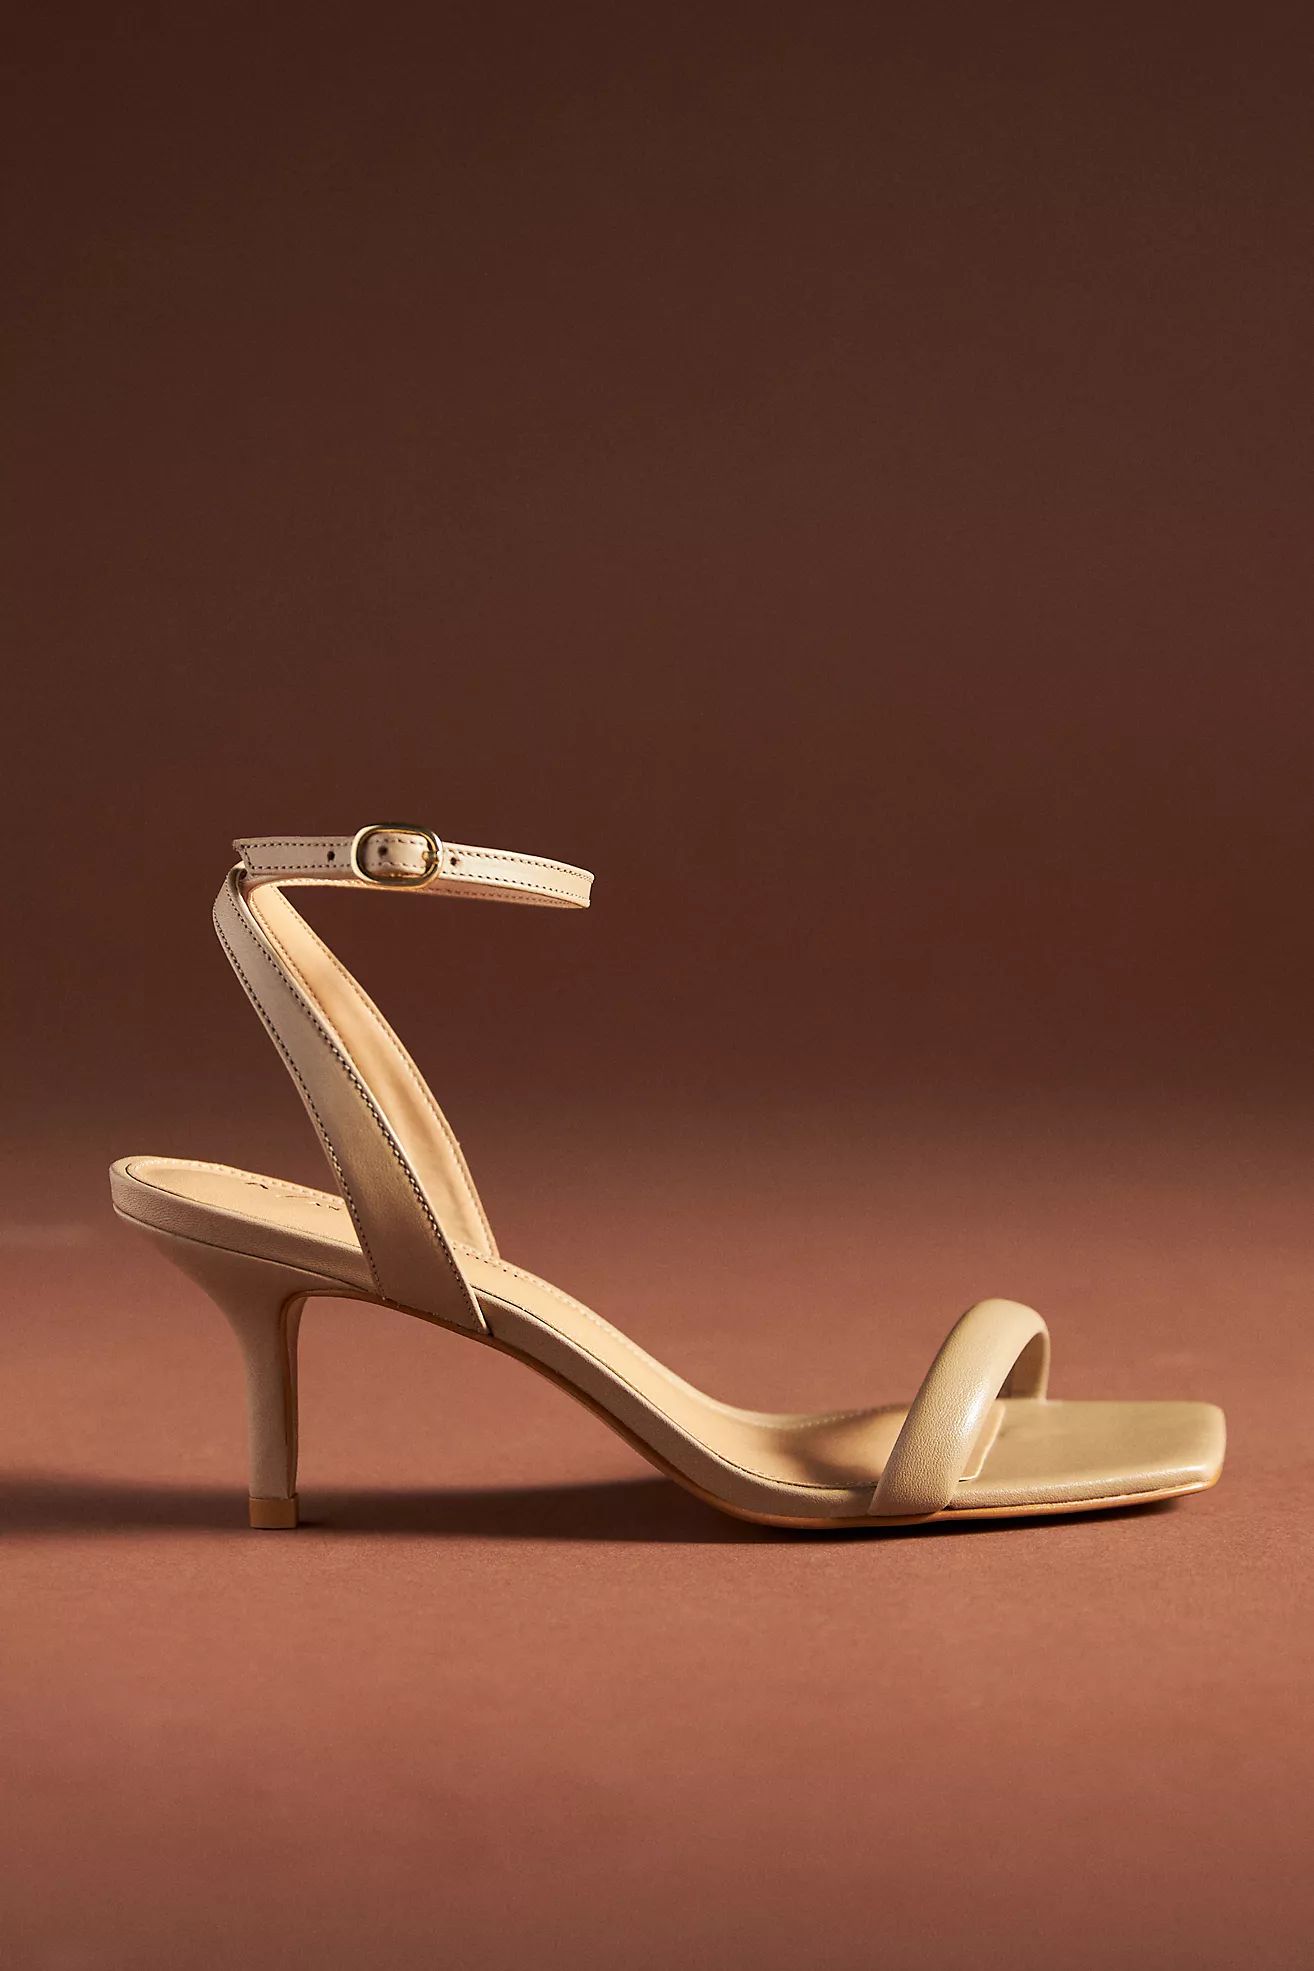 By Anthropologie Square-Toe Ankle-Strap Heels | Anthropologie (US)